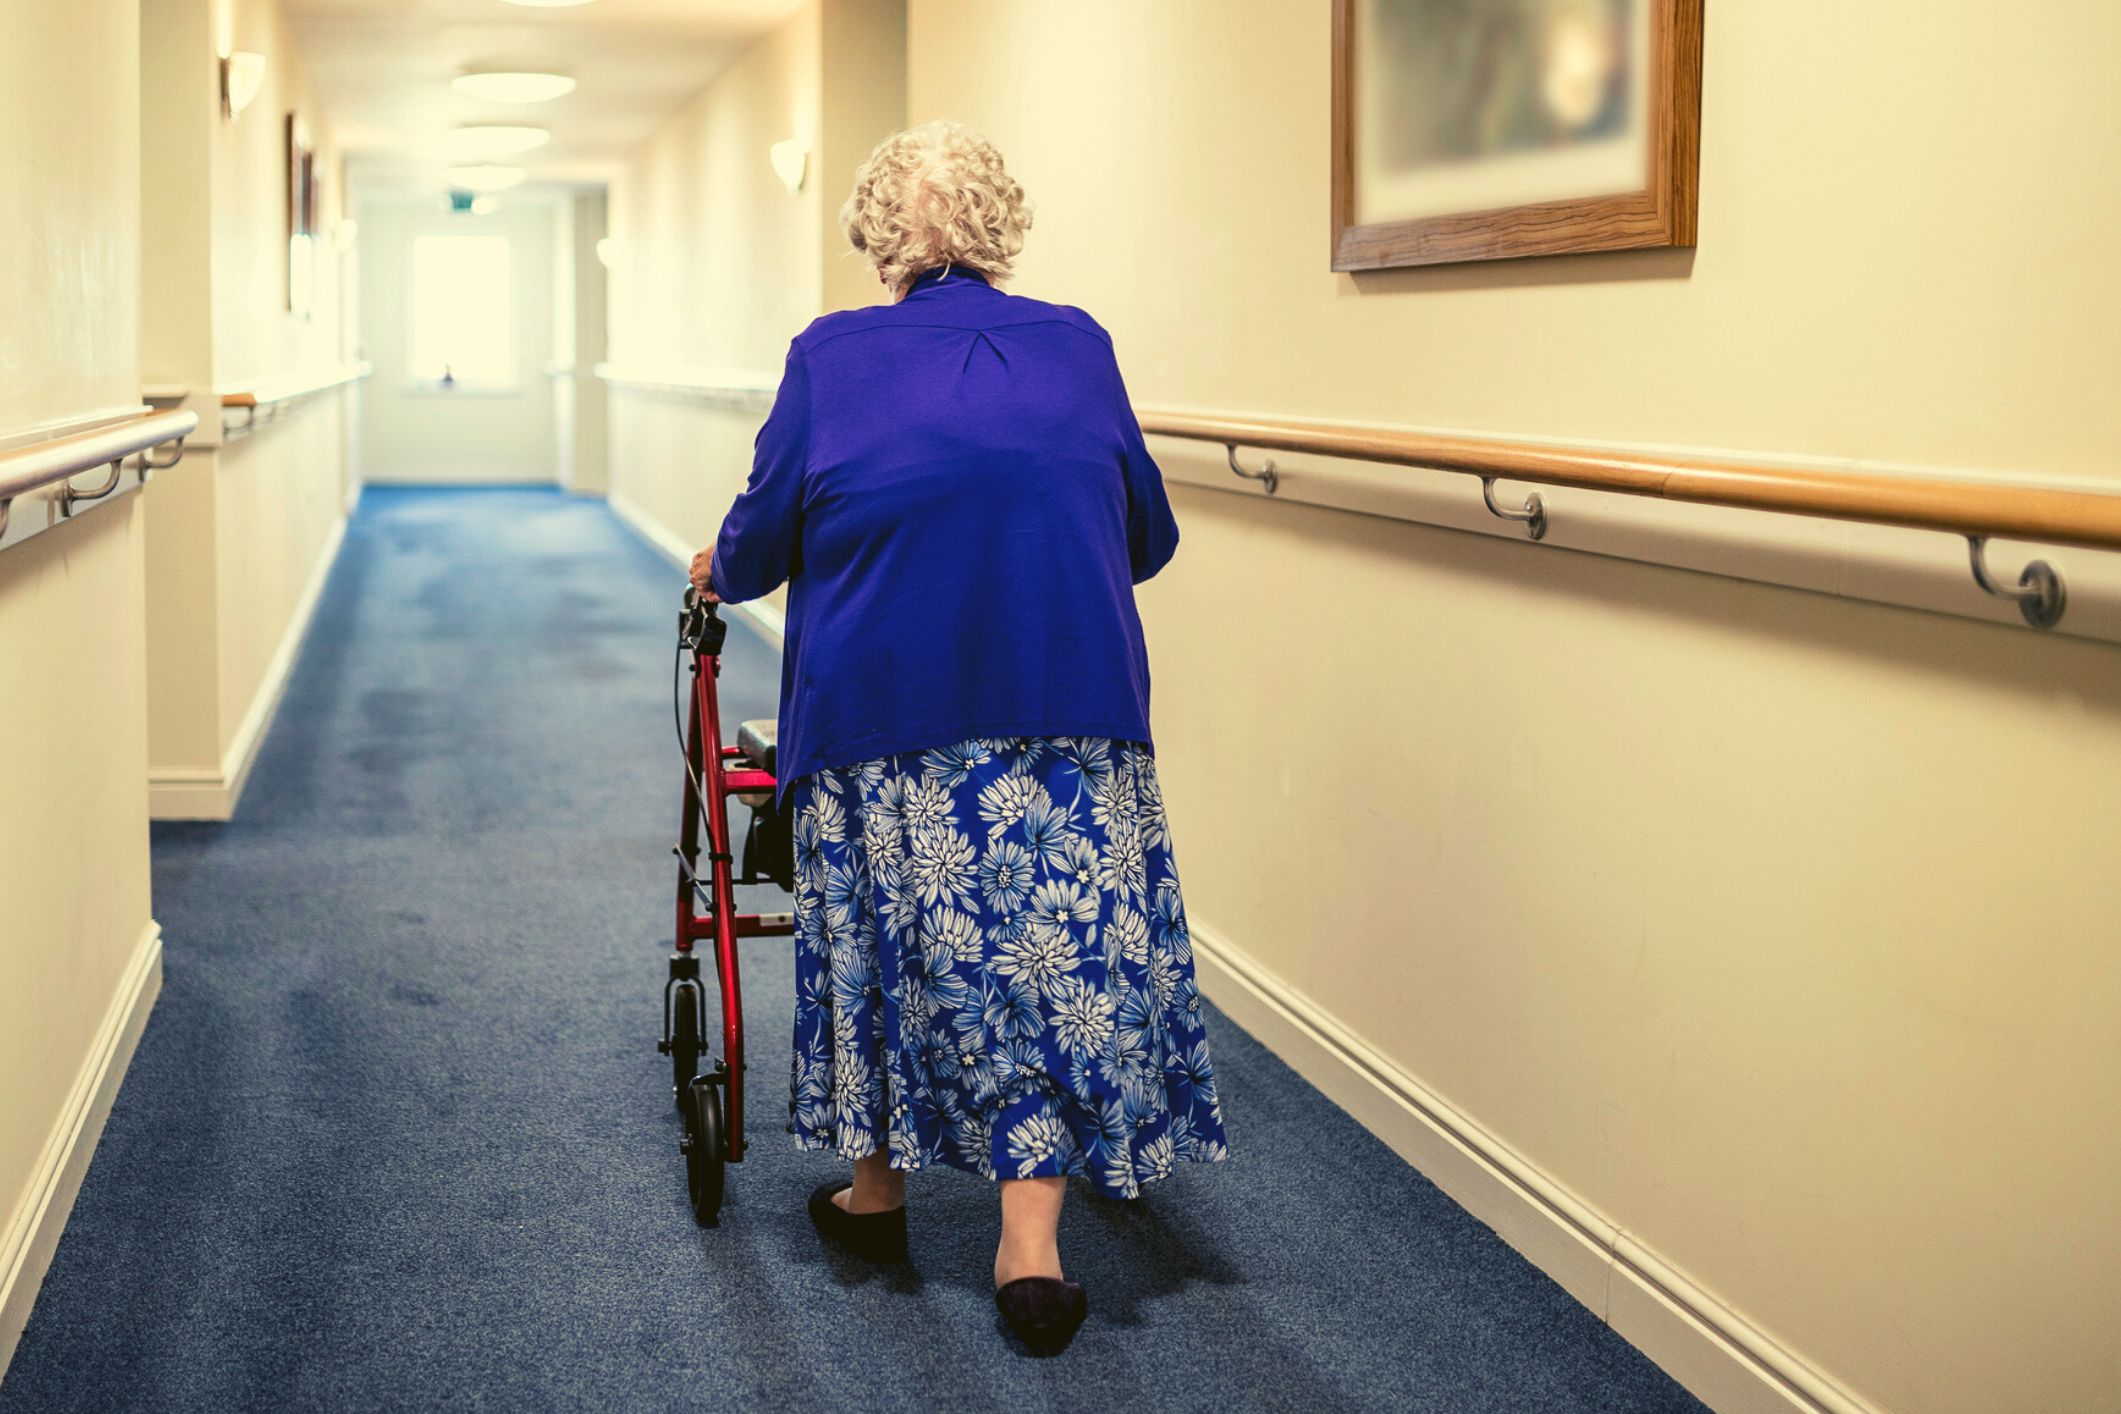 Only 5% of nursing homes are currently above next year’s mandatory staffing targets